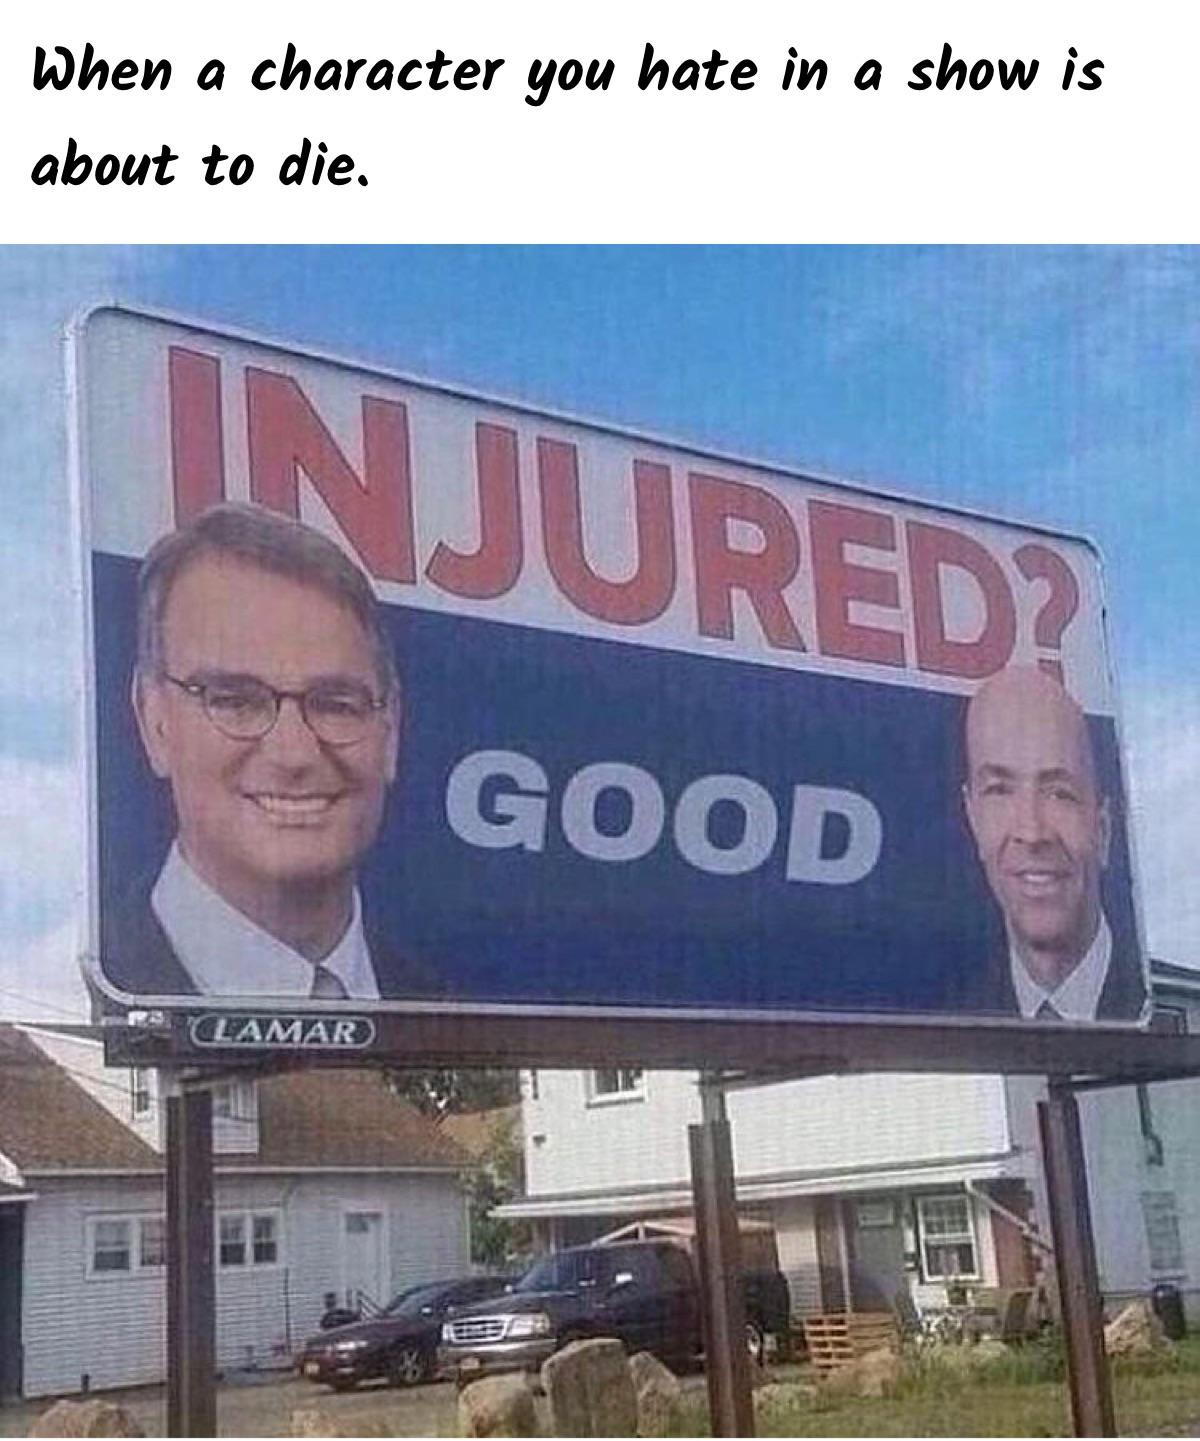 hilarious memes - you hurt good - When a character you hate in a show is about to die, Injured? Good Lamar